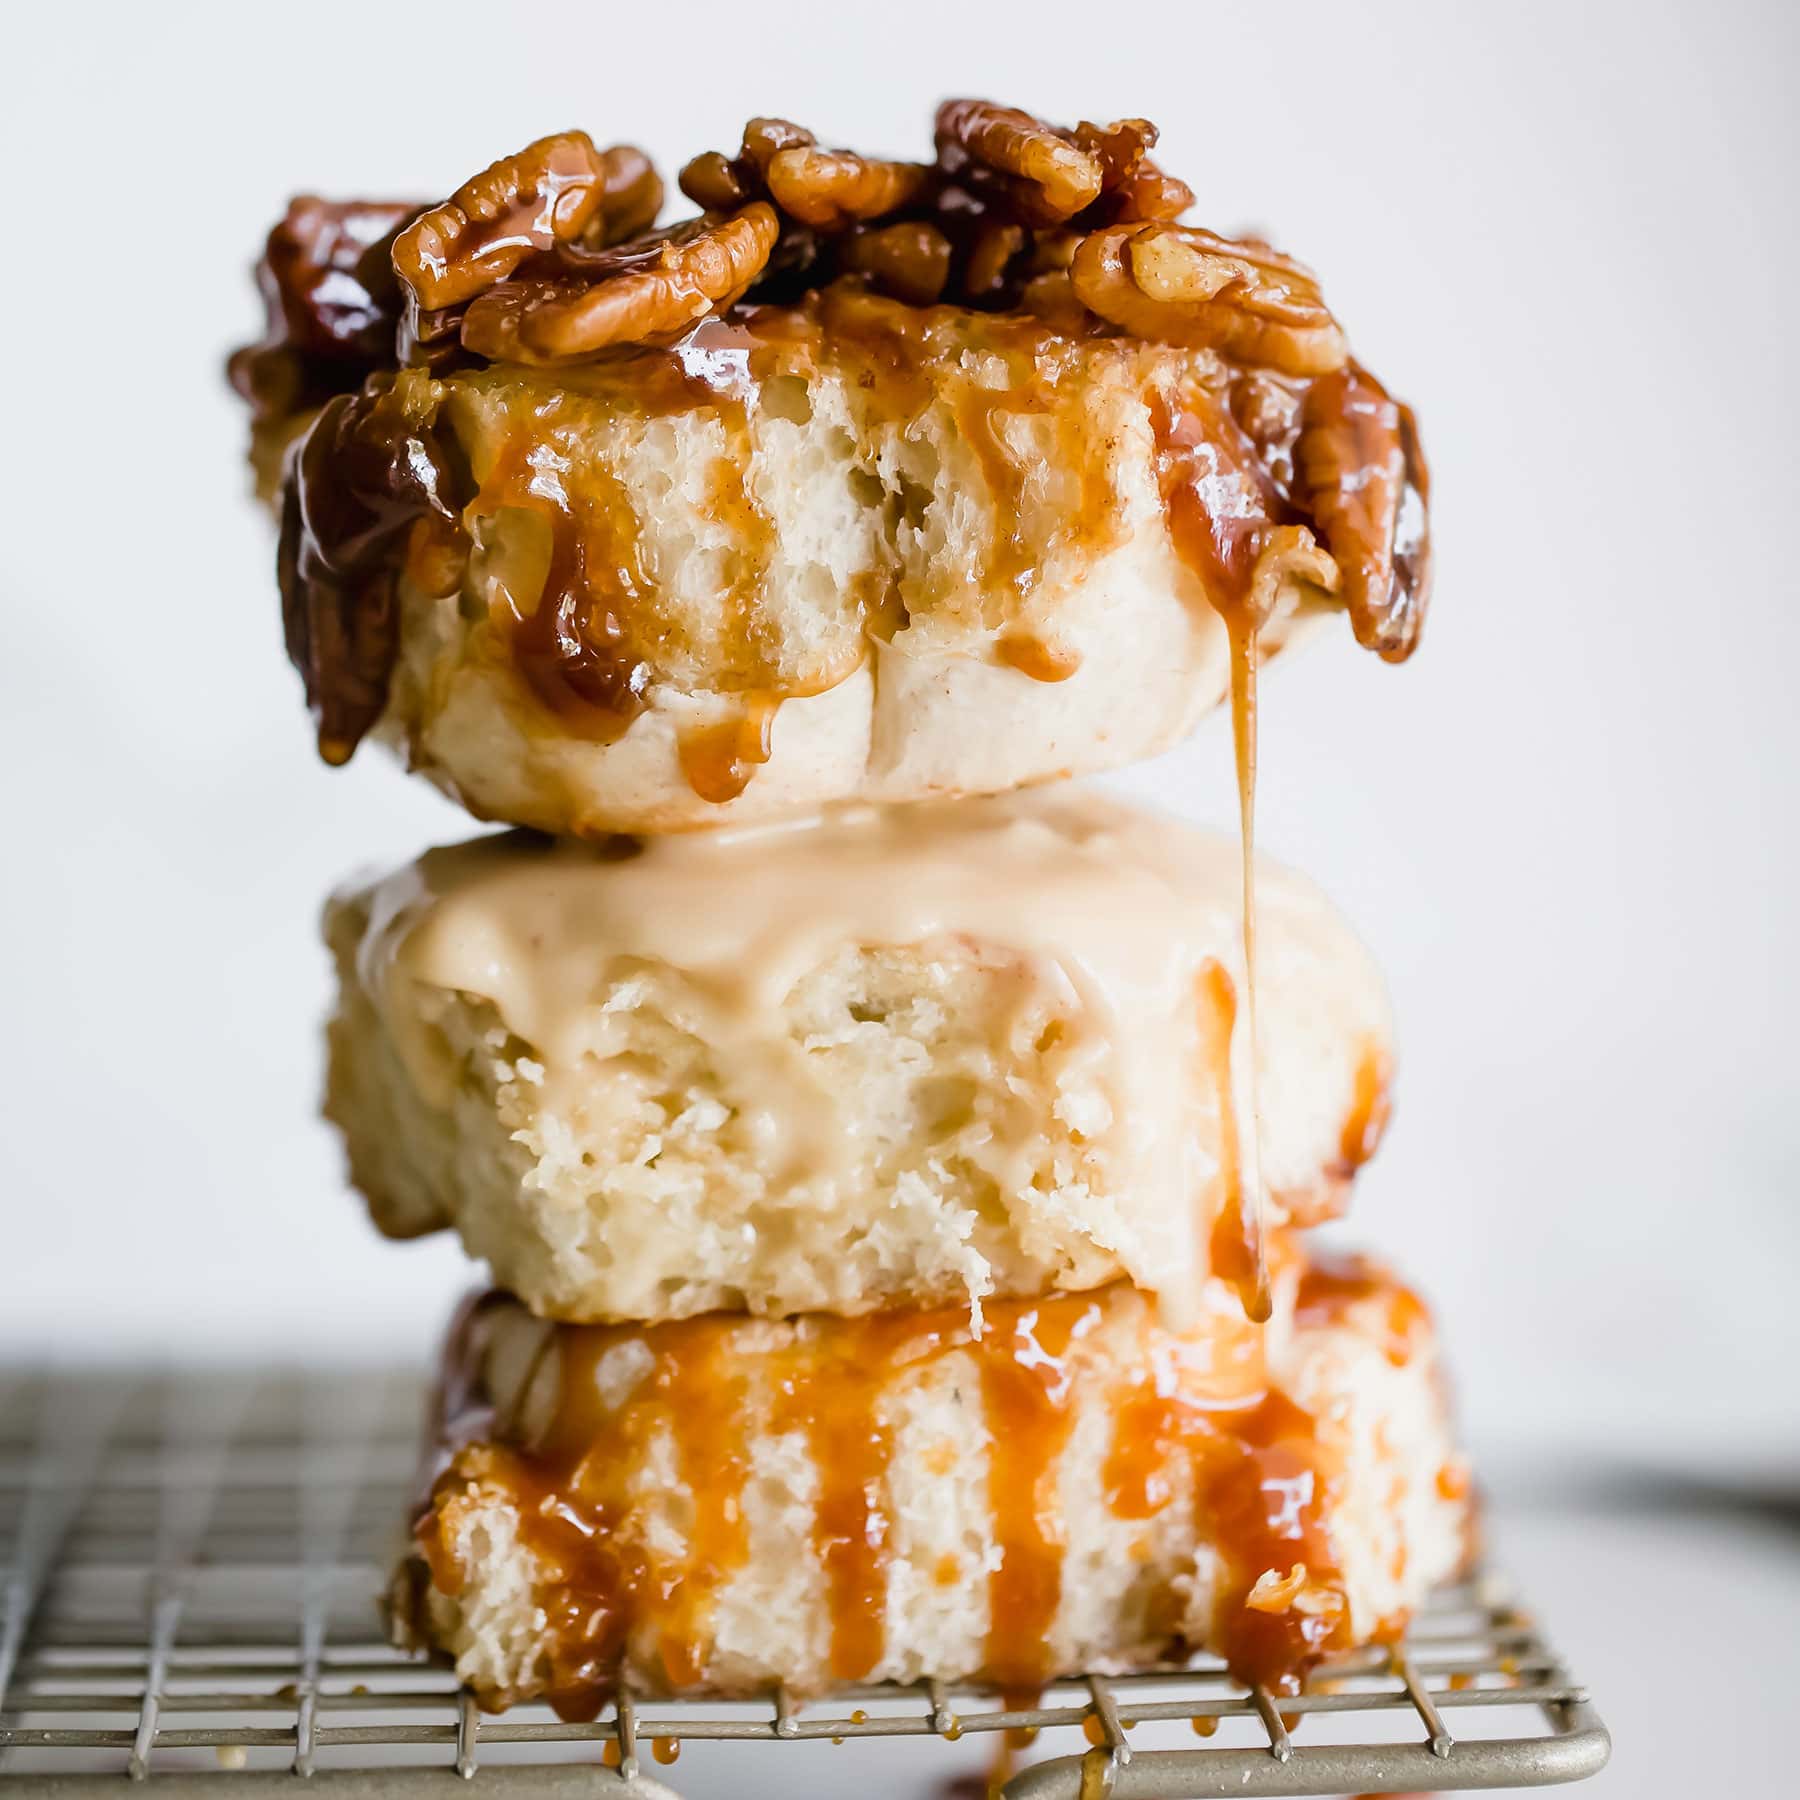 3 easy flavor variations on the classic cinnamon roll that are perfect for fall baking!